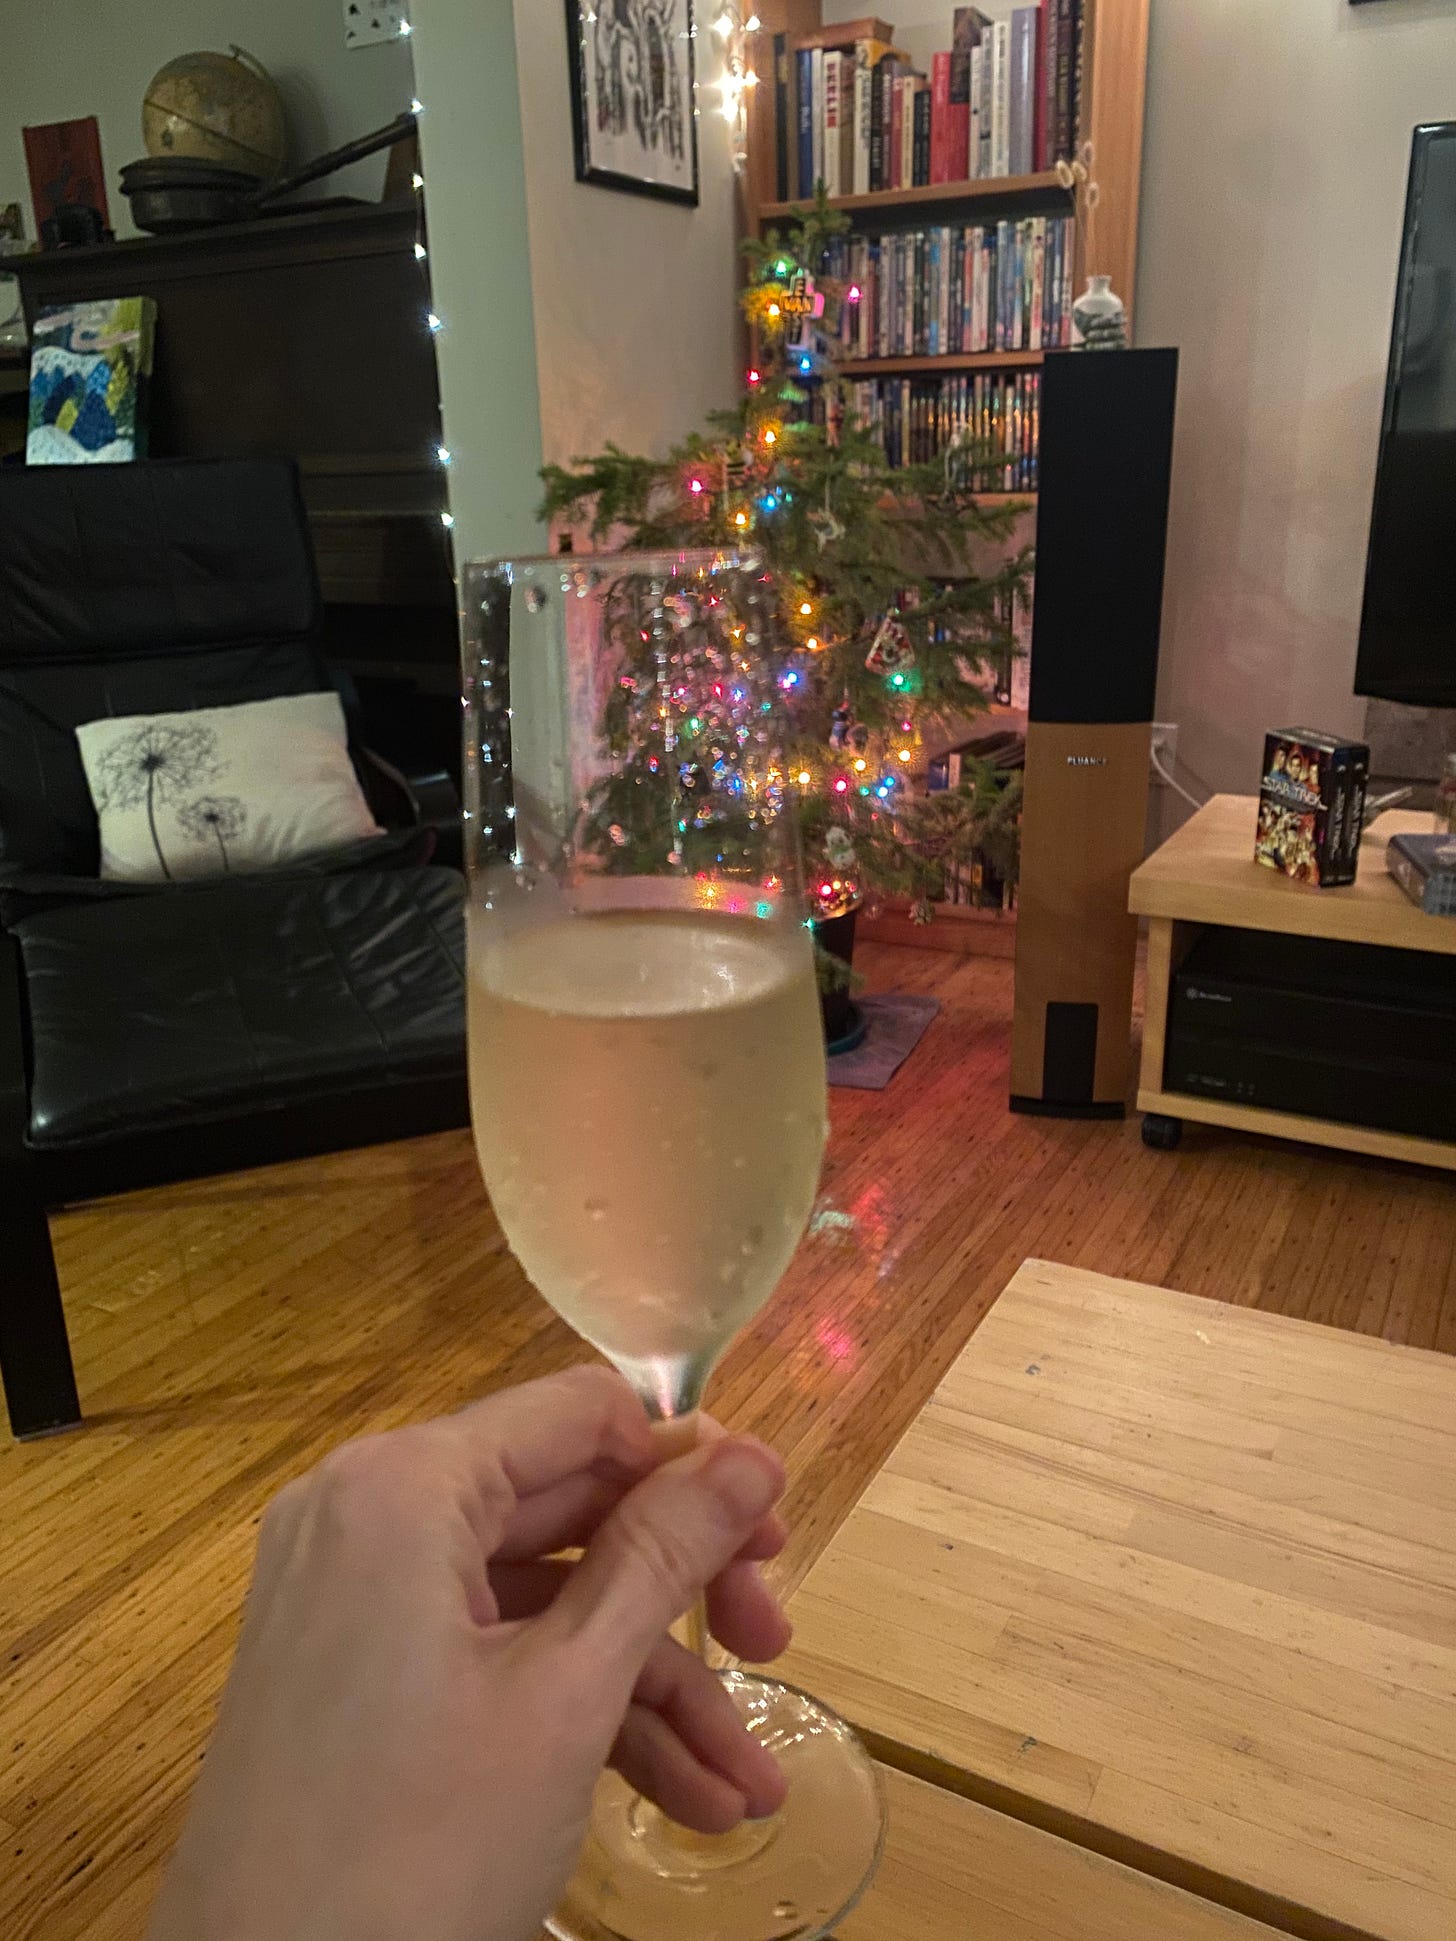 My hand holding a flute of sparkling wine in the living room, the Christmas tree in the background between the tv and a black leather chair and ottoman.